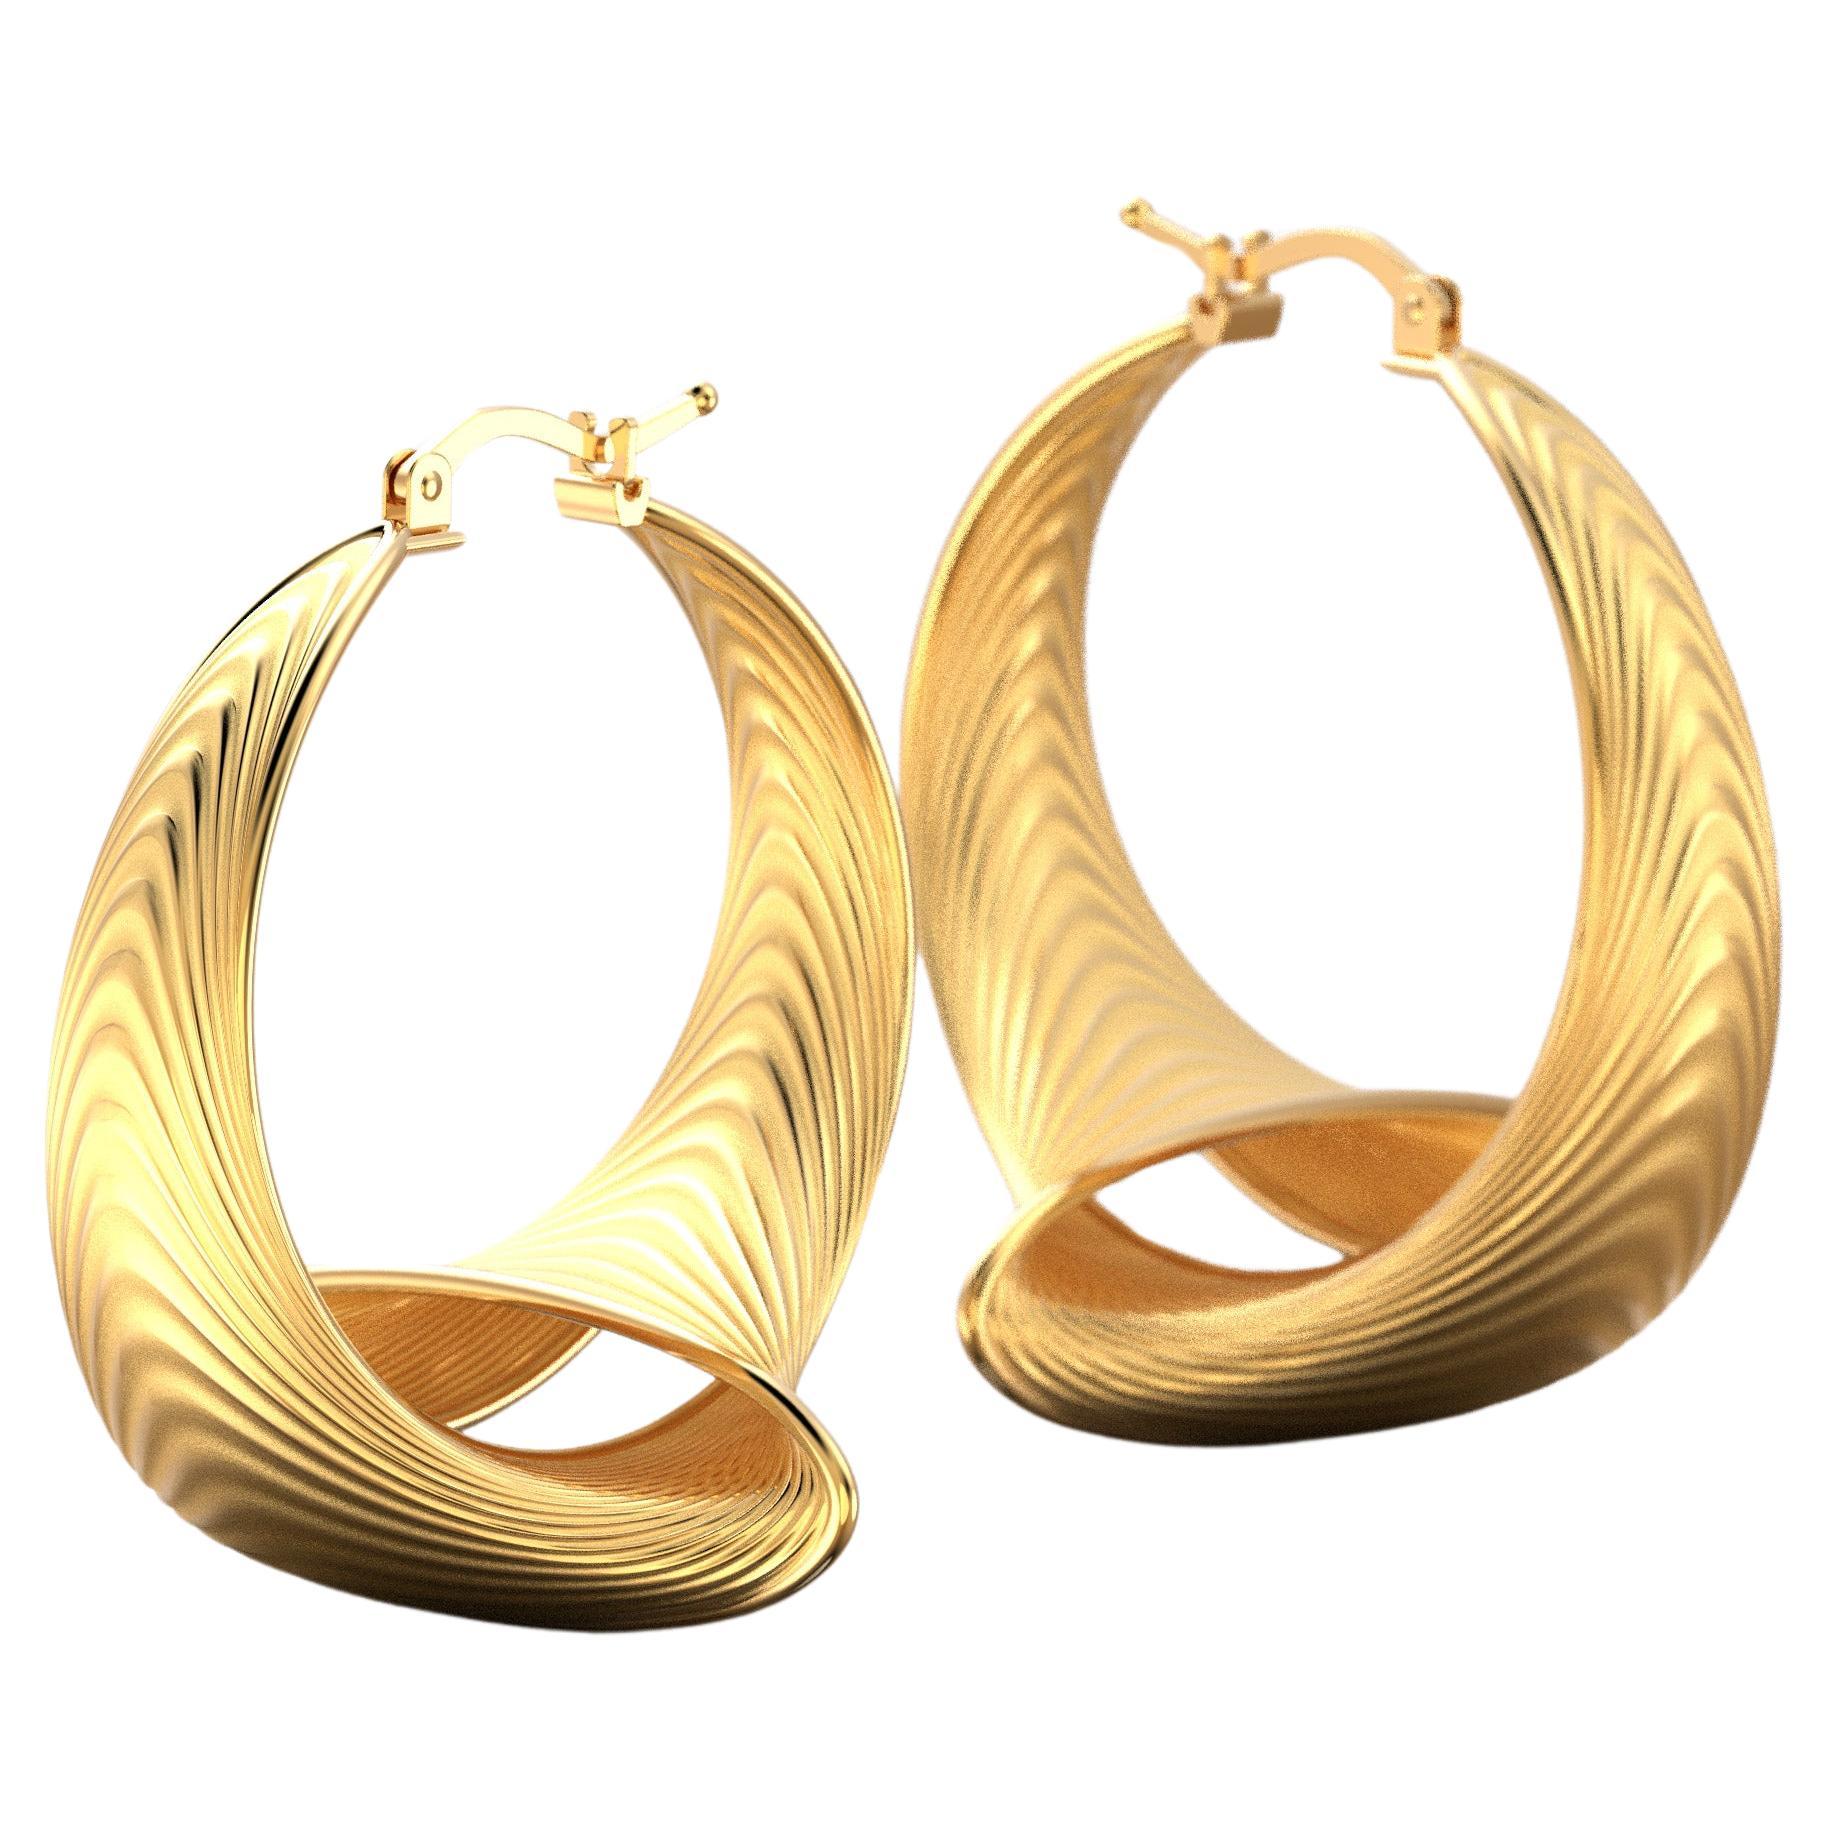 Oltremare Gioielli 18k Gold Hoop Earrings Made in Italy, Italian Gold Jewelry